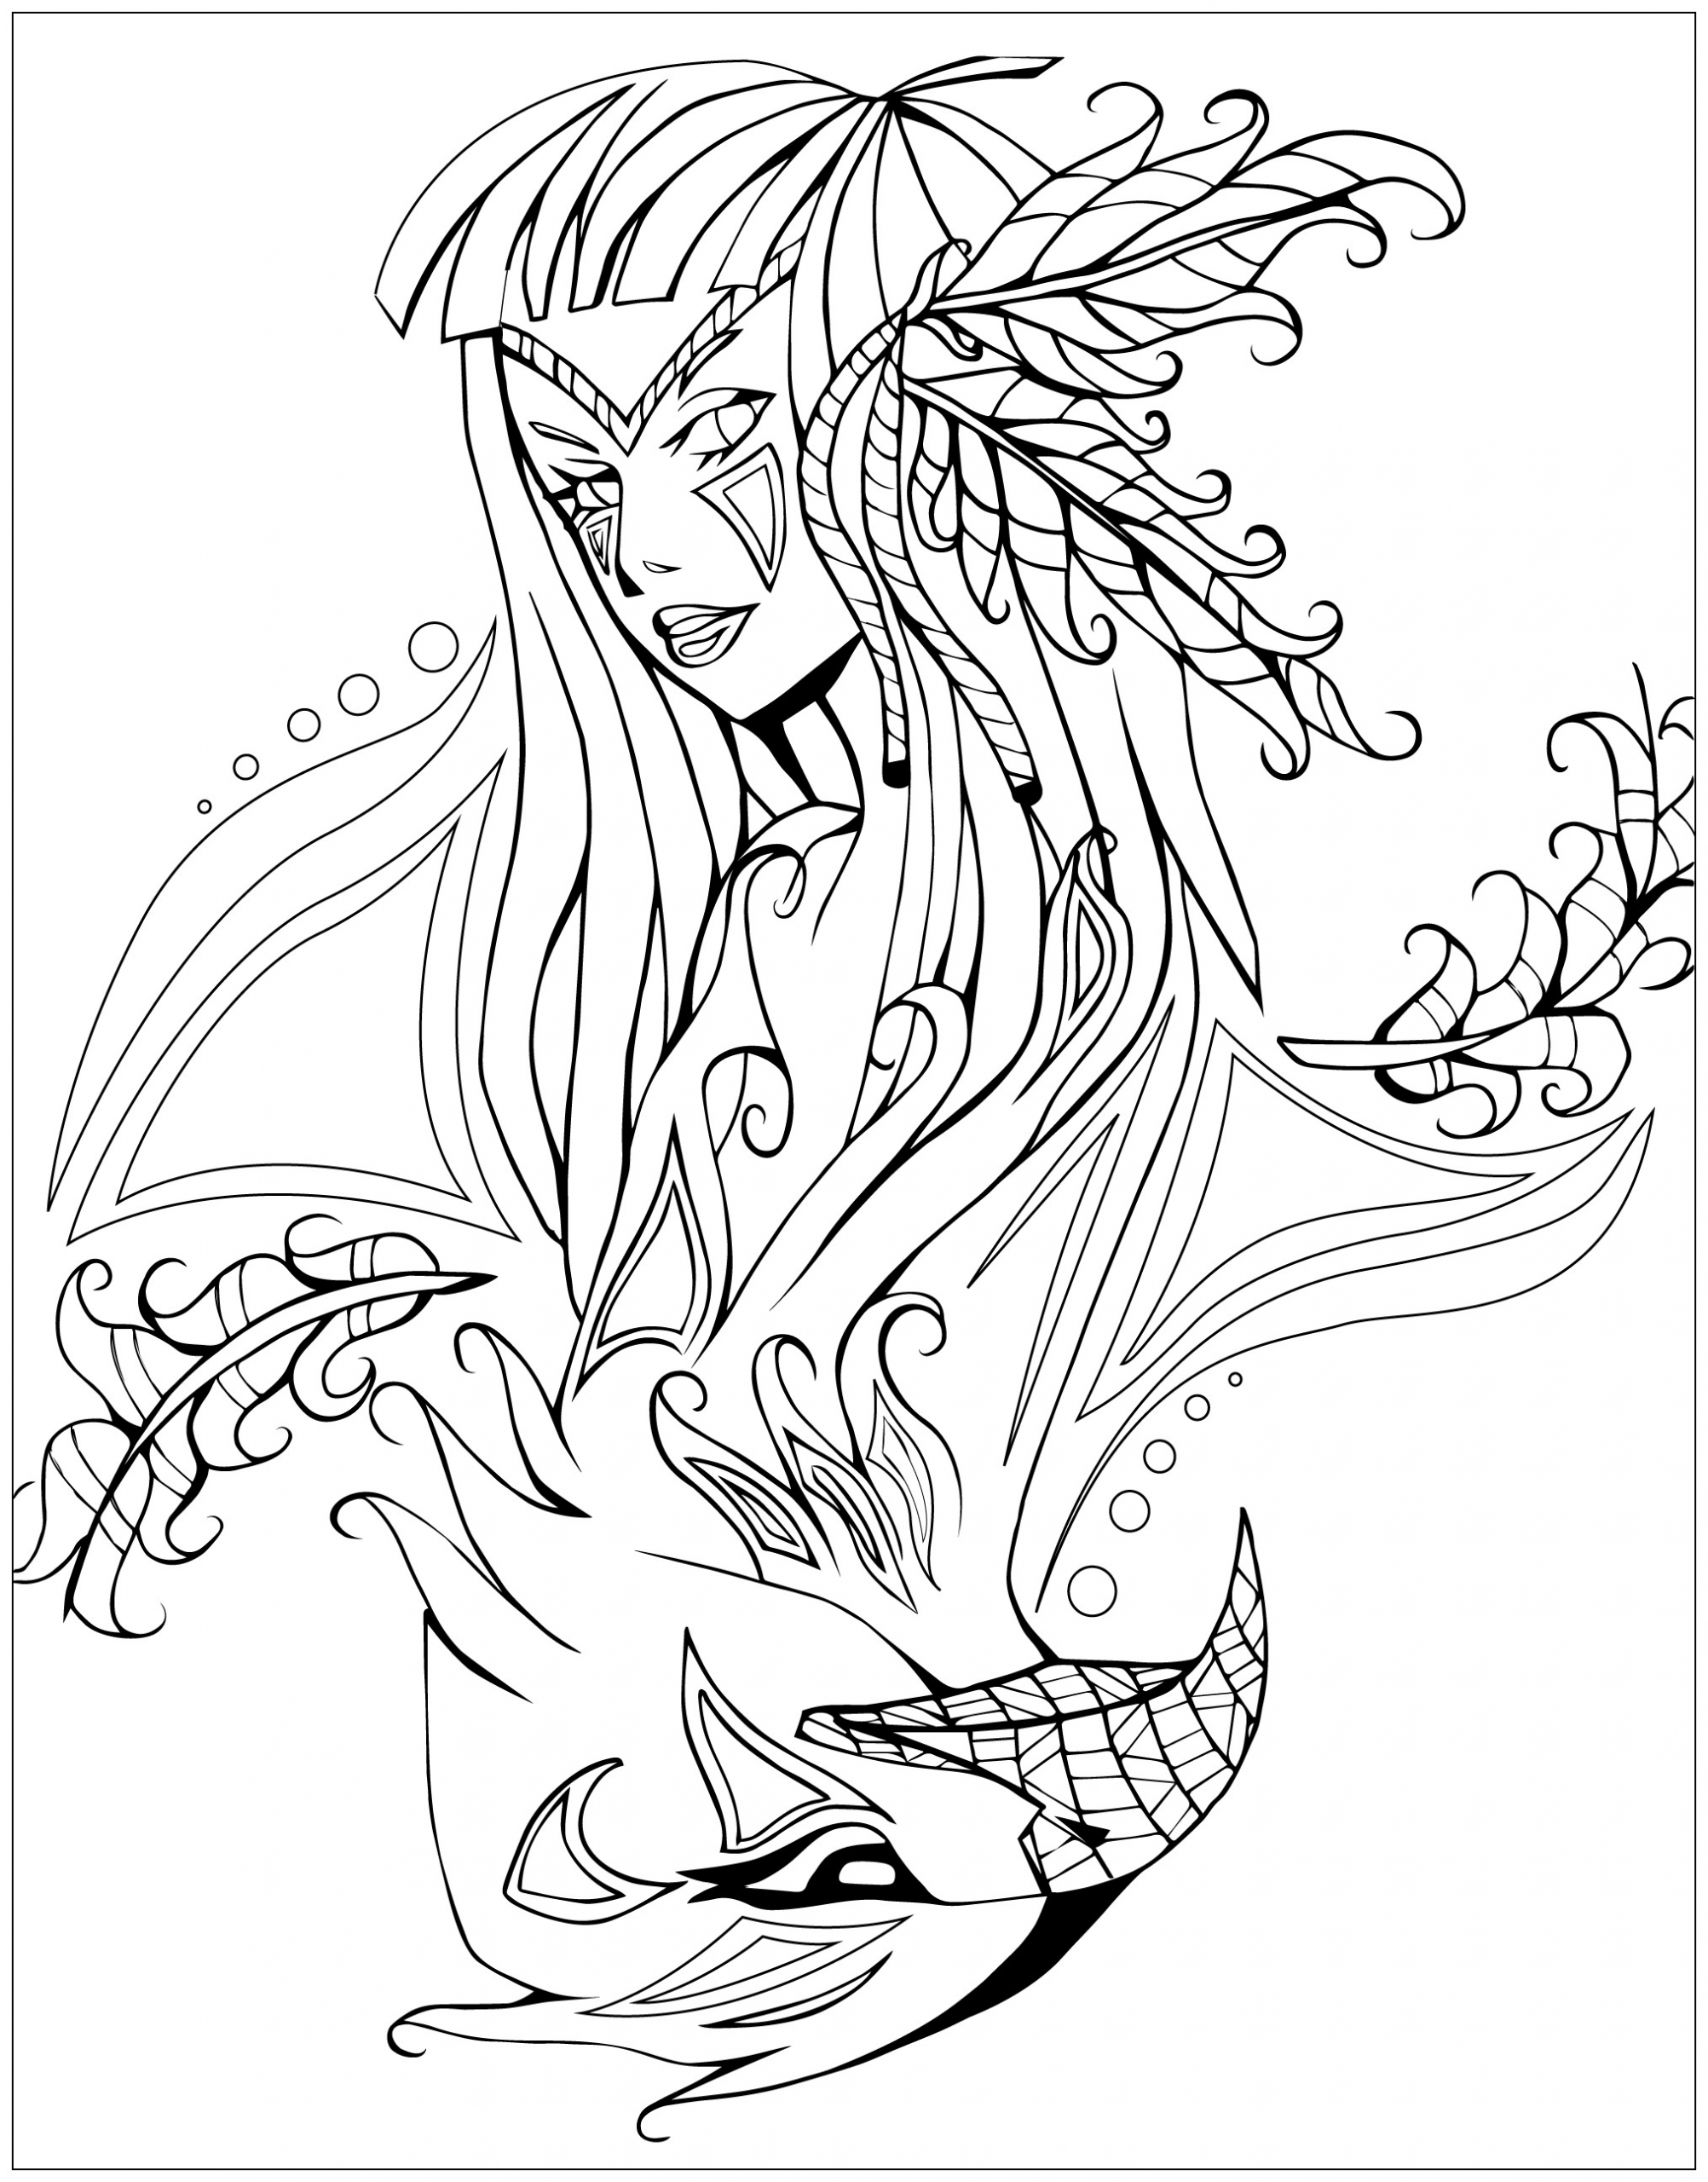 Native American Coloring Pages For Adults
 Native american indian savage spirit Native American